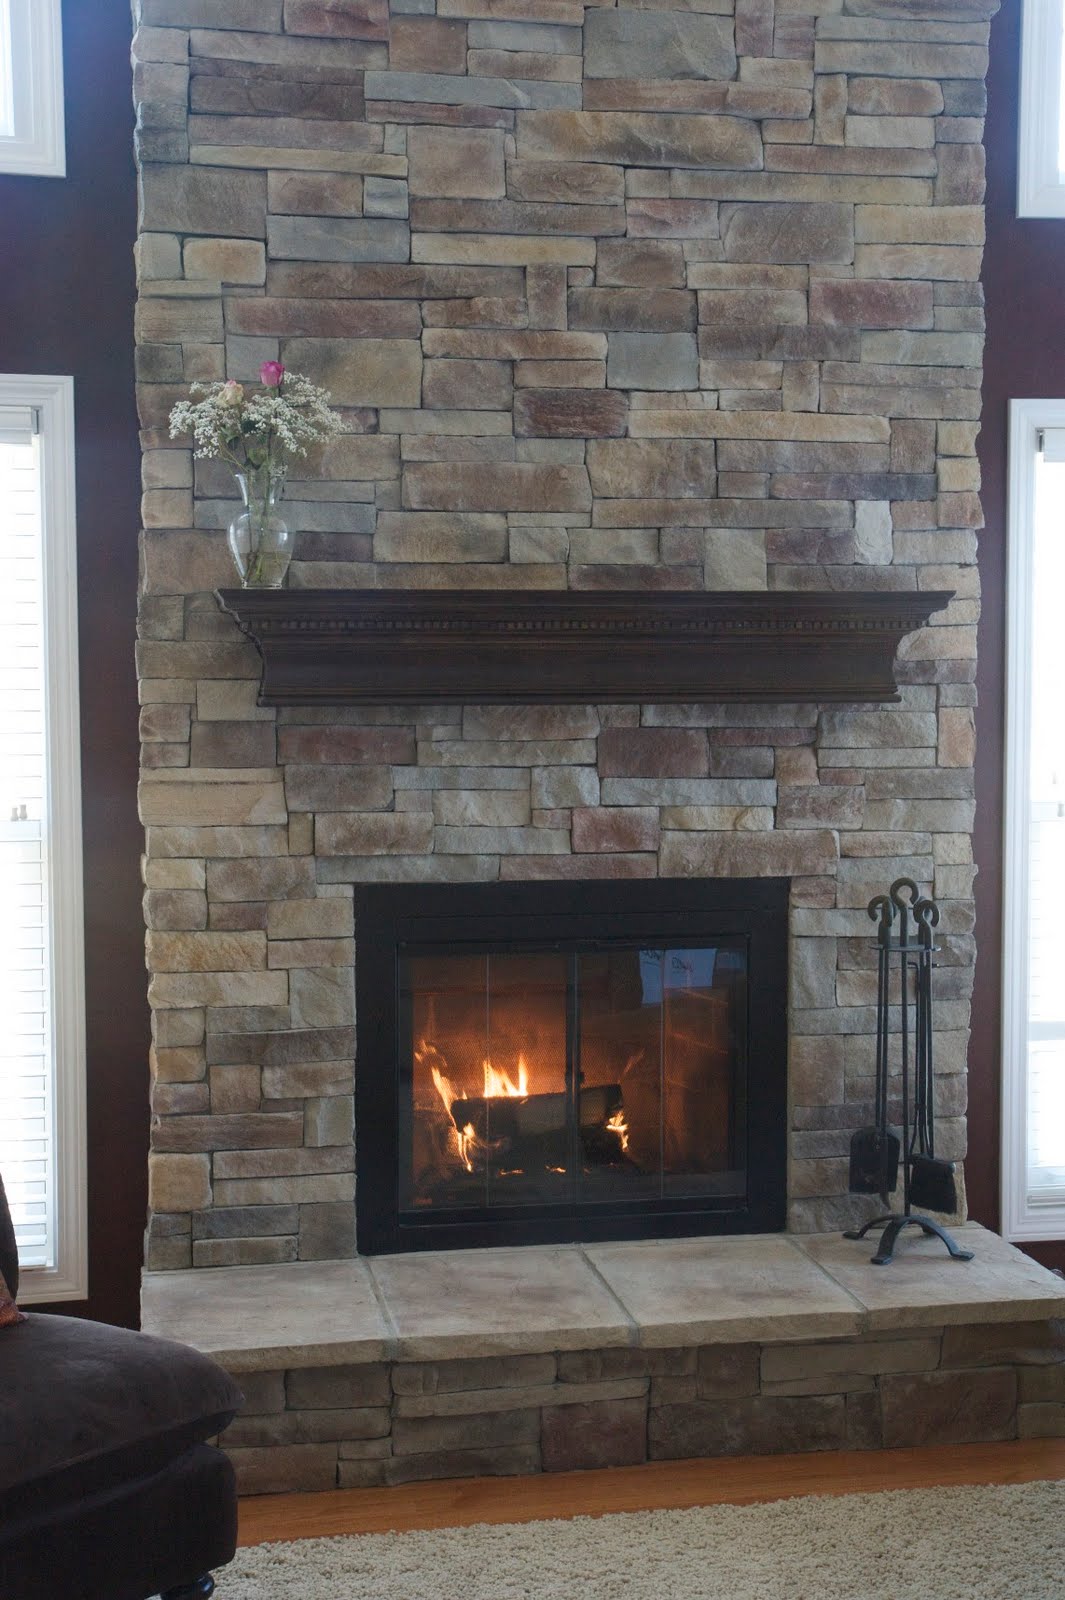 North Star Stone- Stone Fireplaces & Stone Exteriors: Did You Know ...